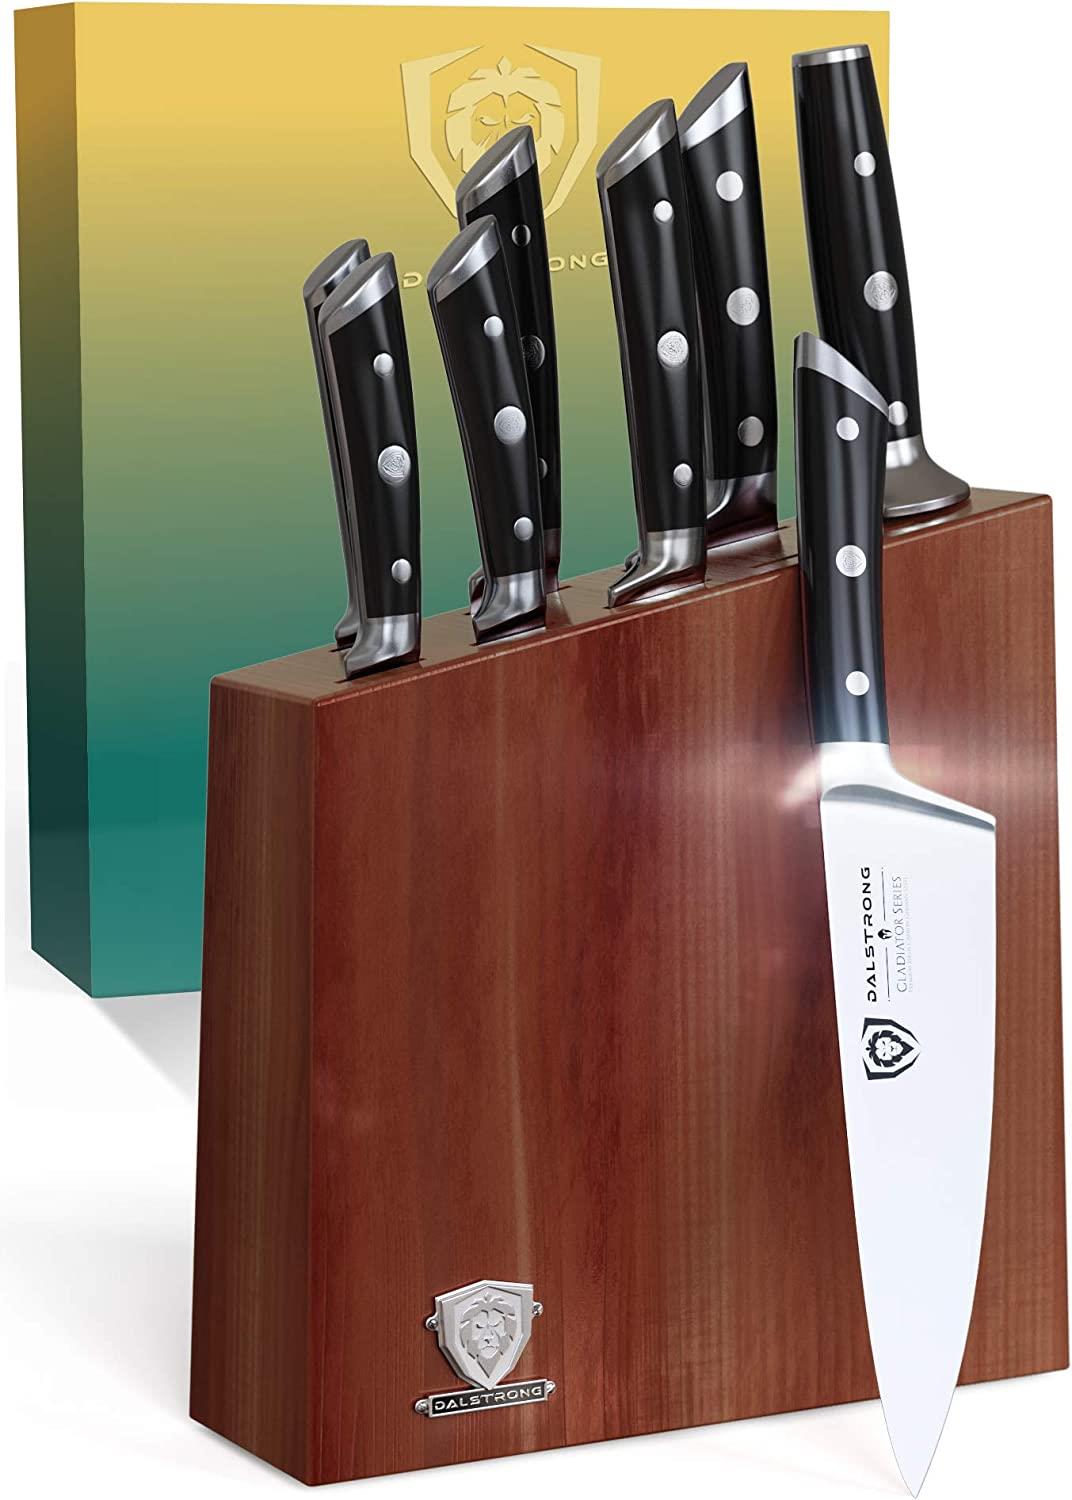 Knife Set Block | 5 Piece | Gladiator Series Knives | Dalstrong